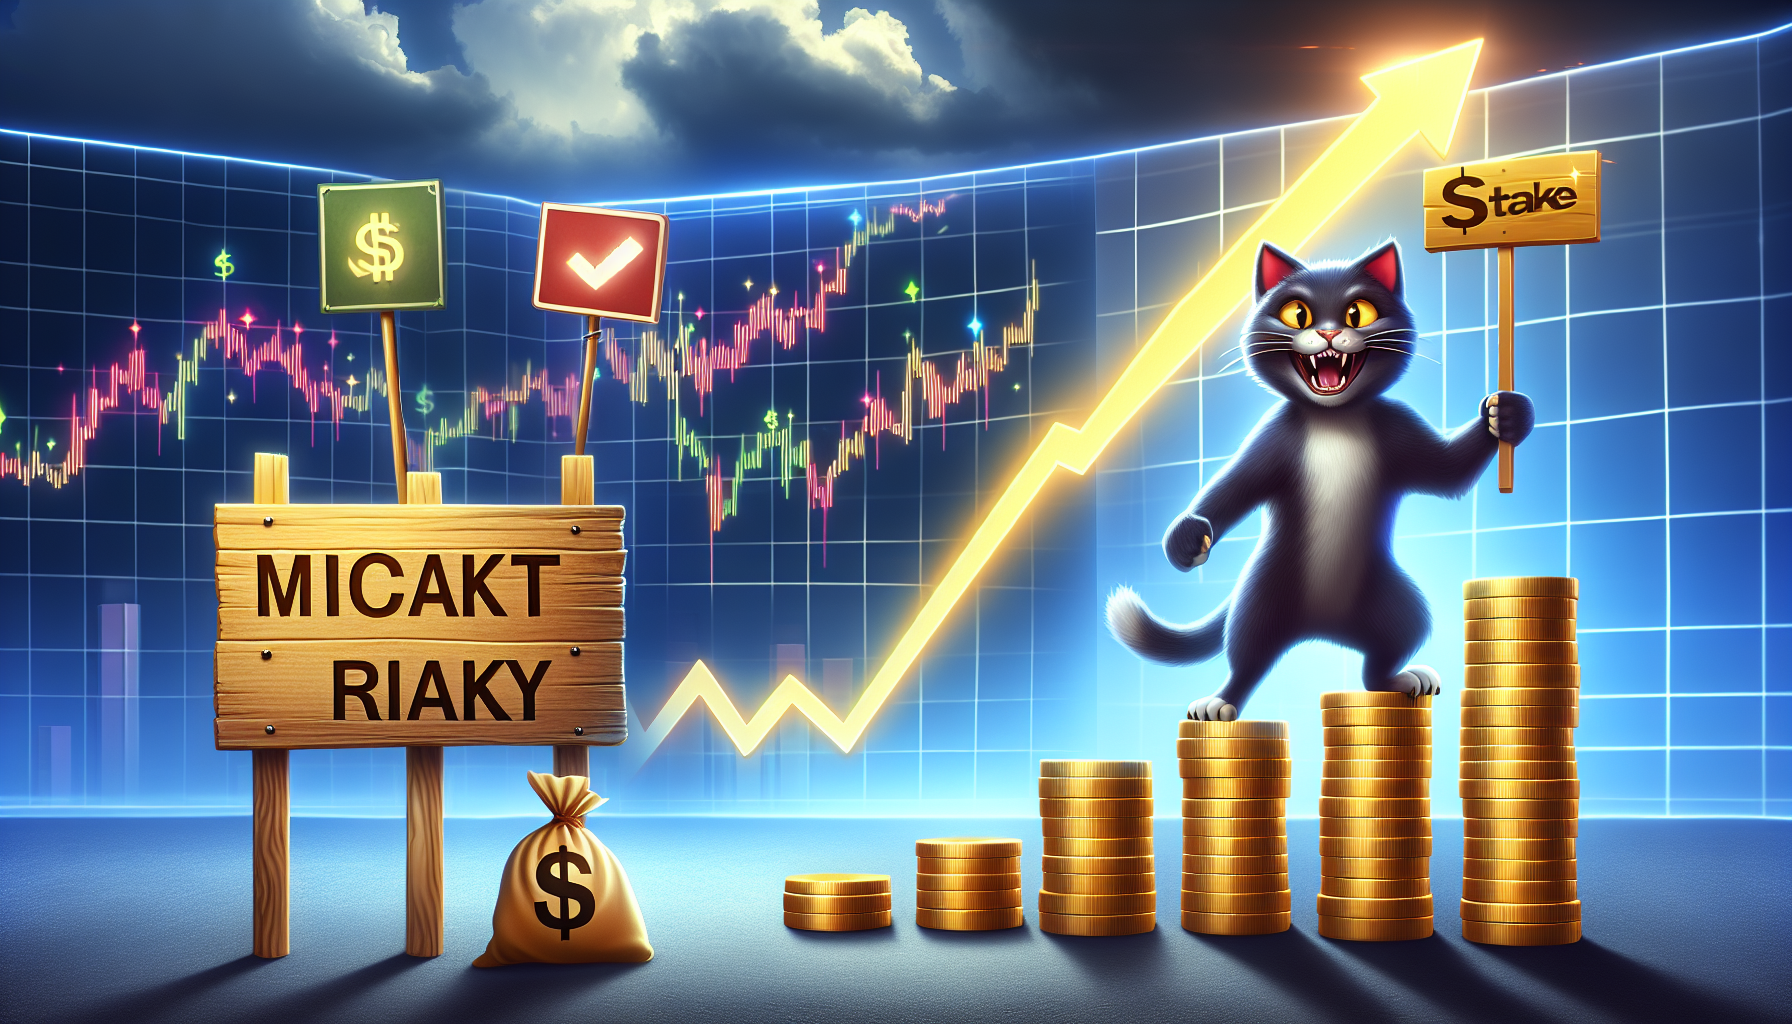 Roaring kitty’s new stake in Chewy sparks market rally and investment opportunities